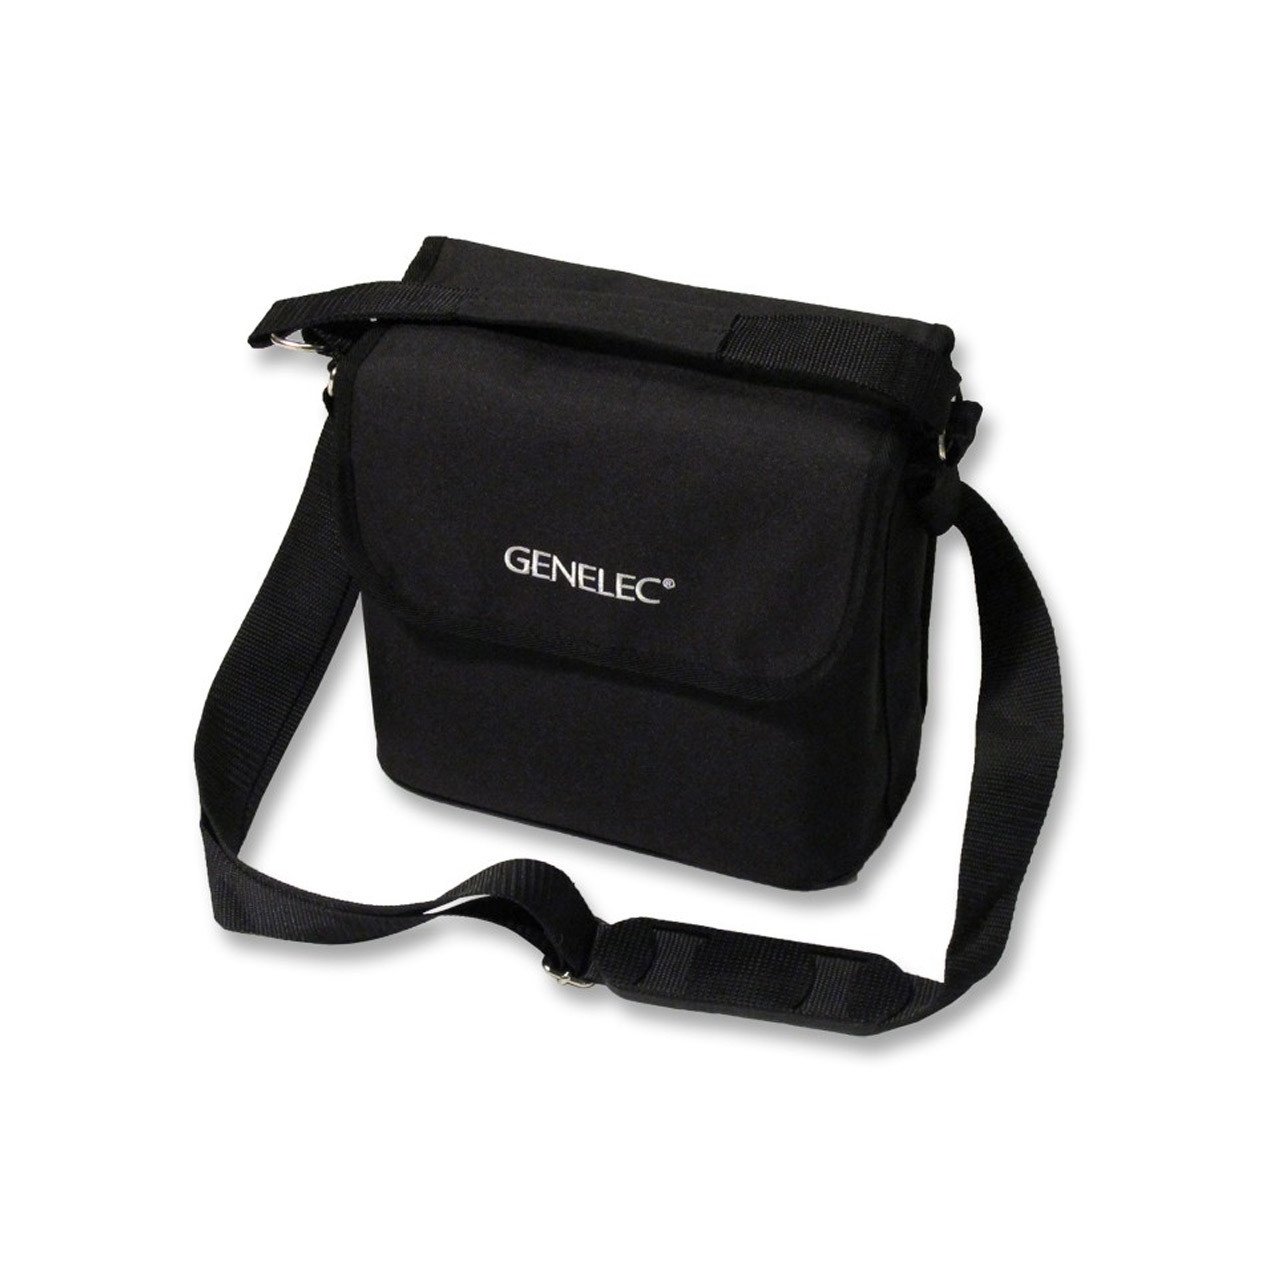 Studio Monitor Accessories - Genelec 8010-424 Soft Carrying Bag For Two 8010 Monitors